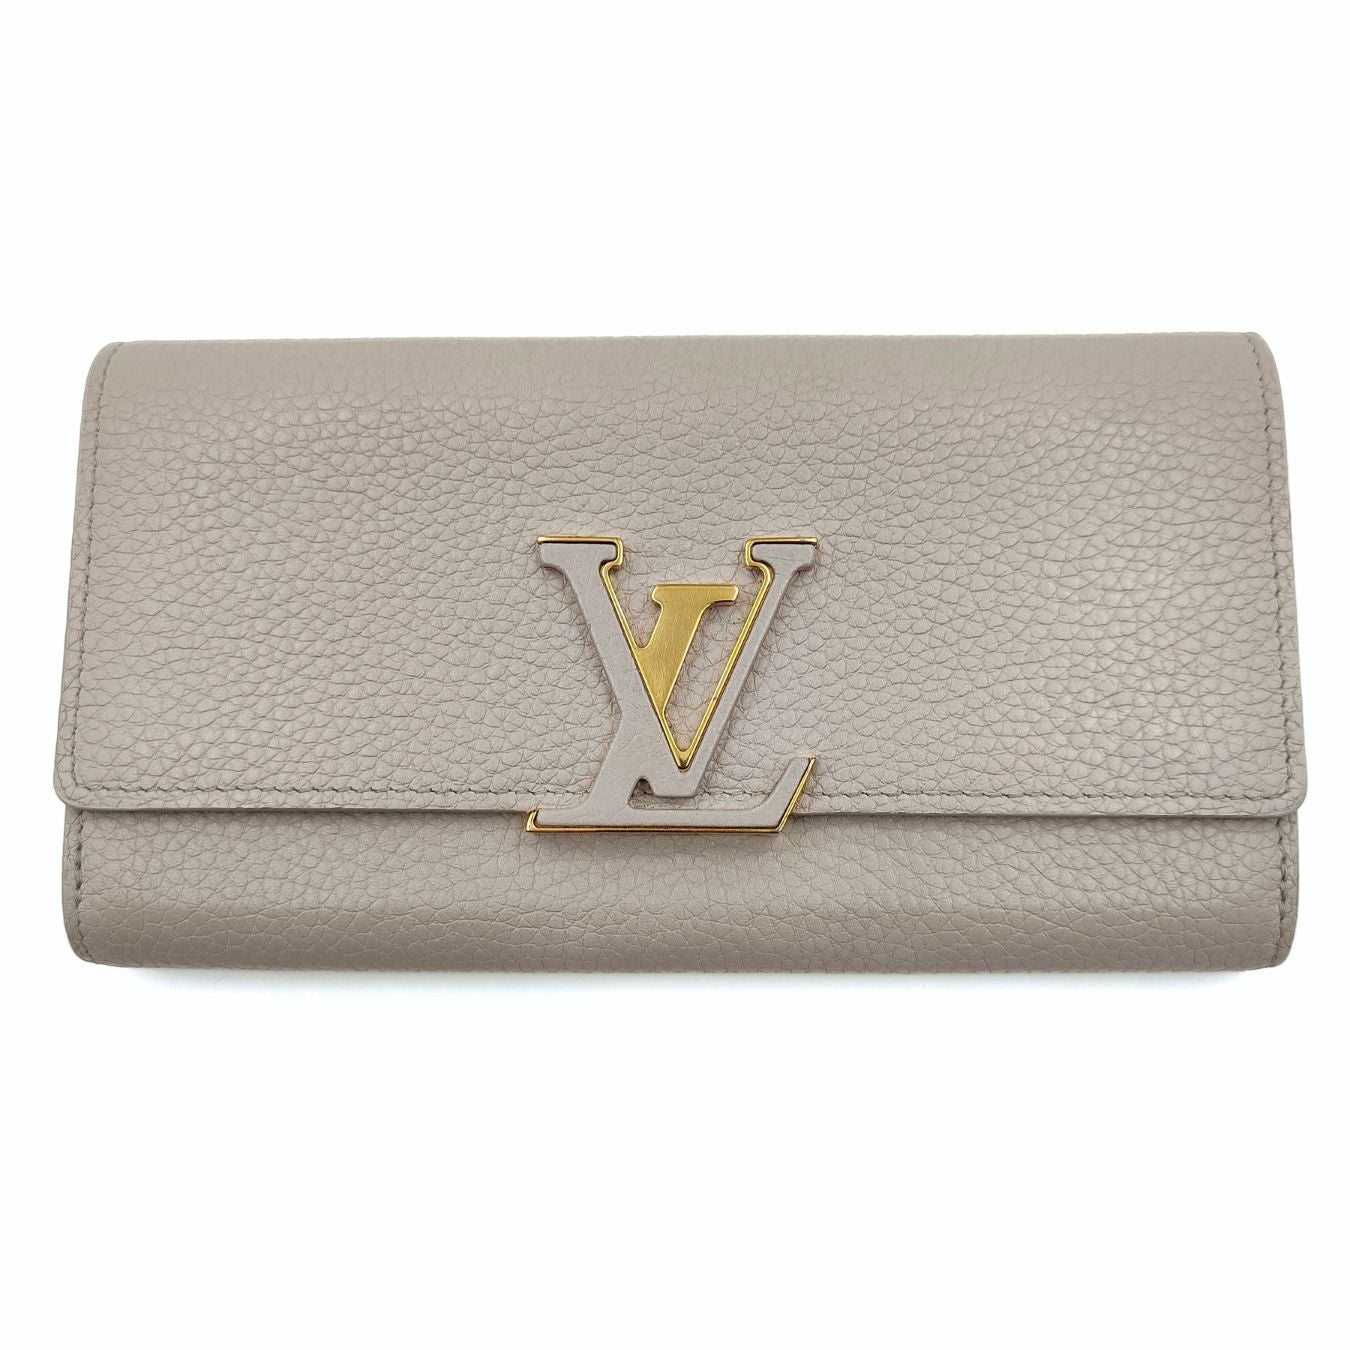 Louis Vuitton Louis Vuitton Louis Vuitton Capucines Wallet in Light Gray Leather